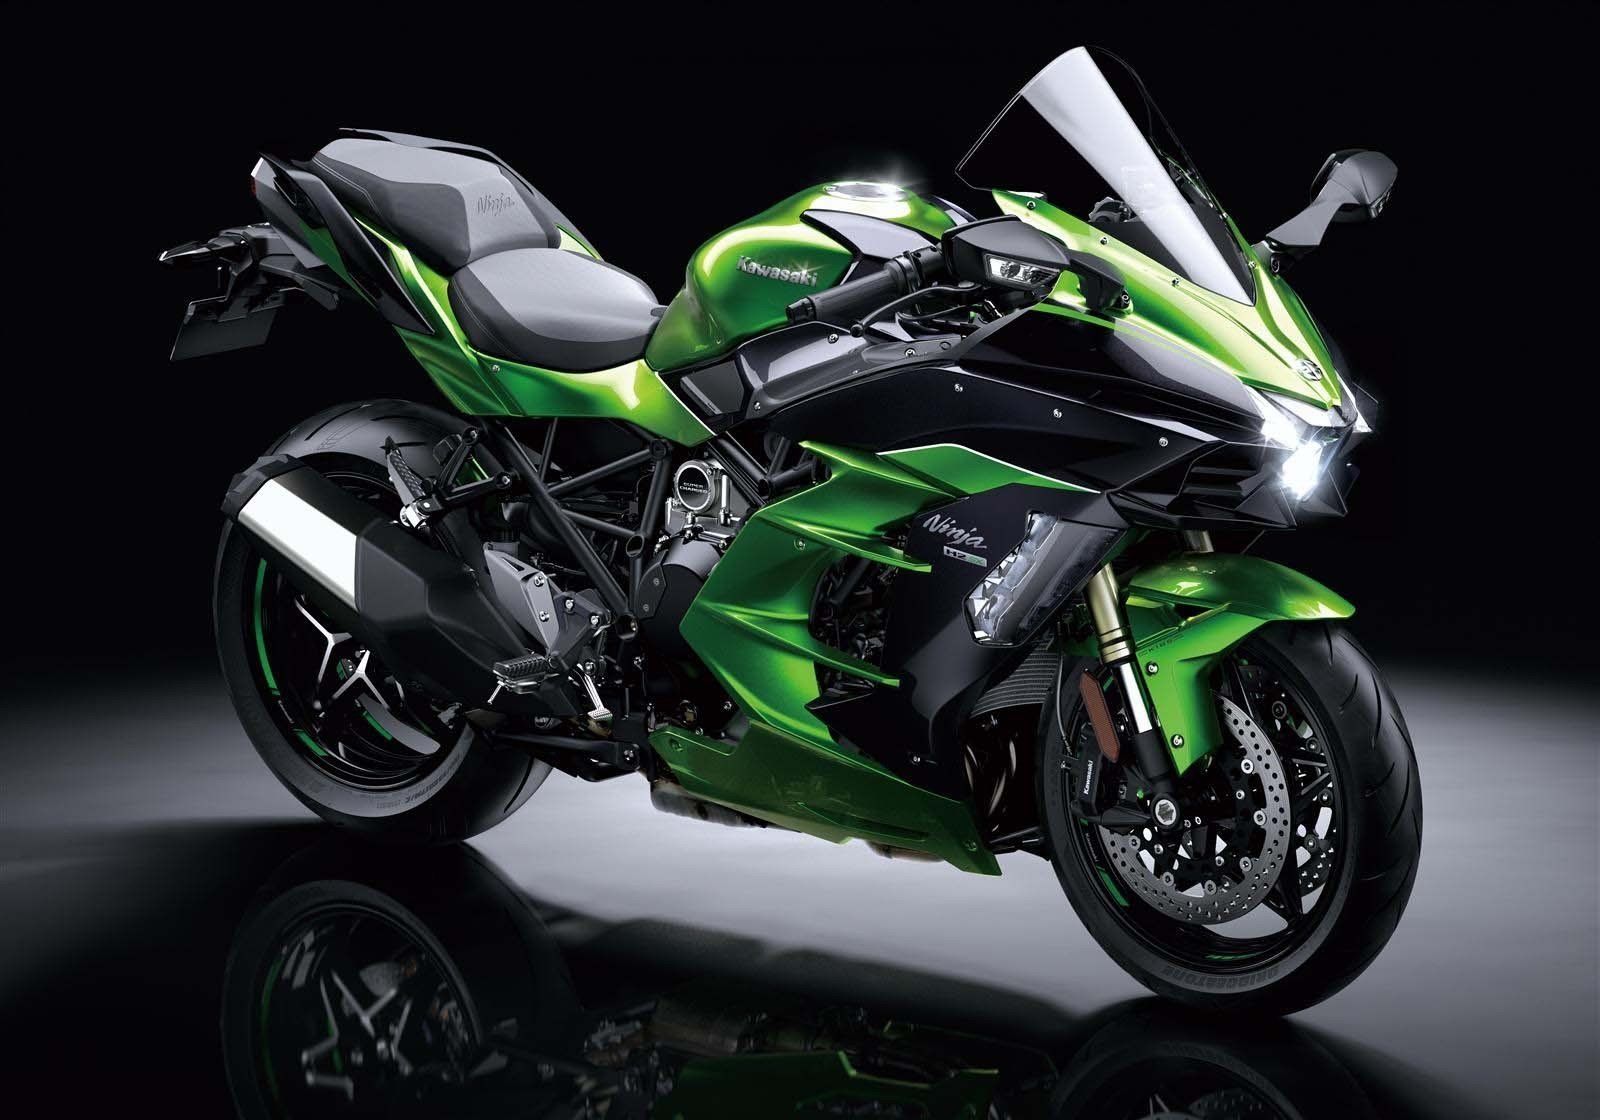 After The Mighty Ninja H2 And H2R, Kawasaki Brings In The 207 Hp H2 SX To The Table